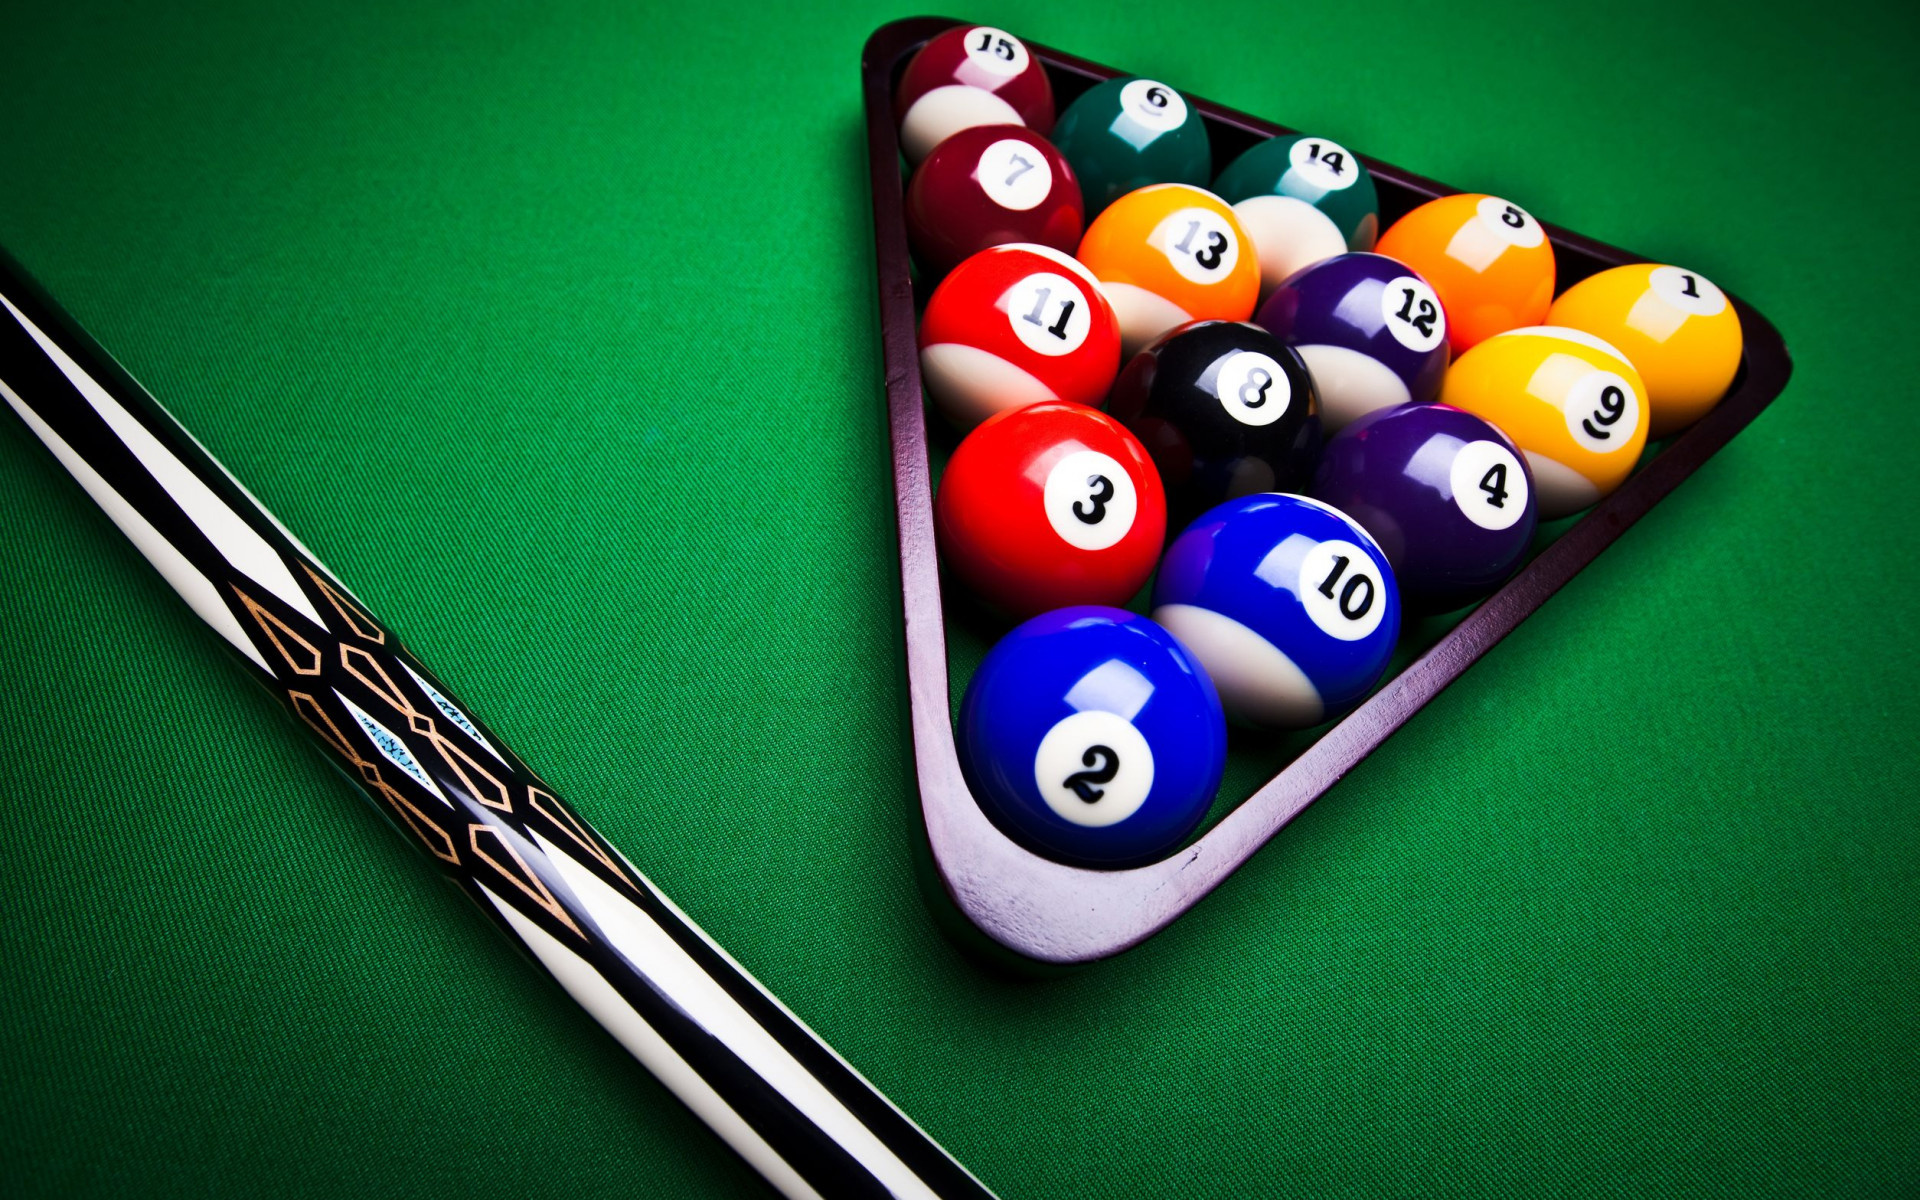 Cue Sports: Two cue sticks, Billiard balls in a rack, Eight-ball style recreational game. 1920x1200 HD Wallpaper.